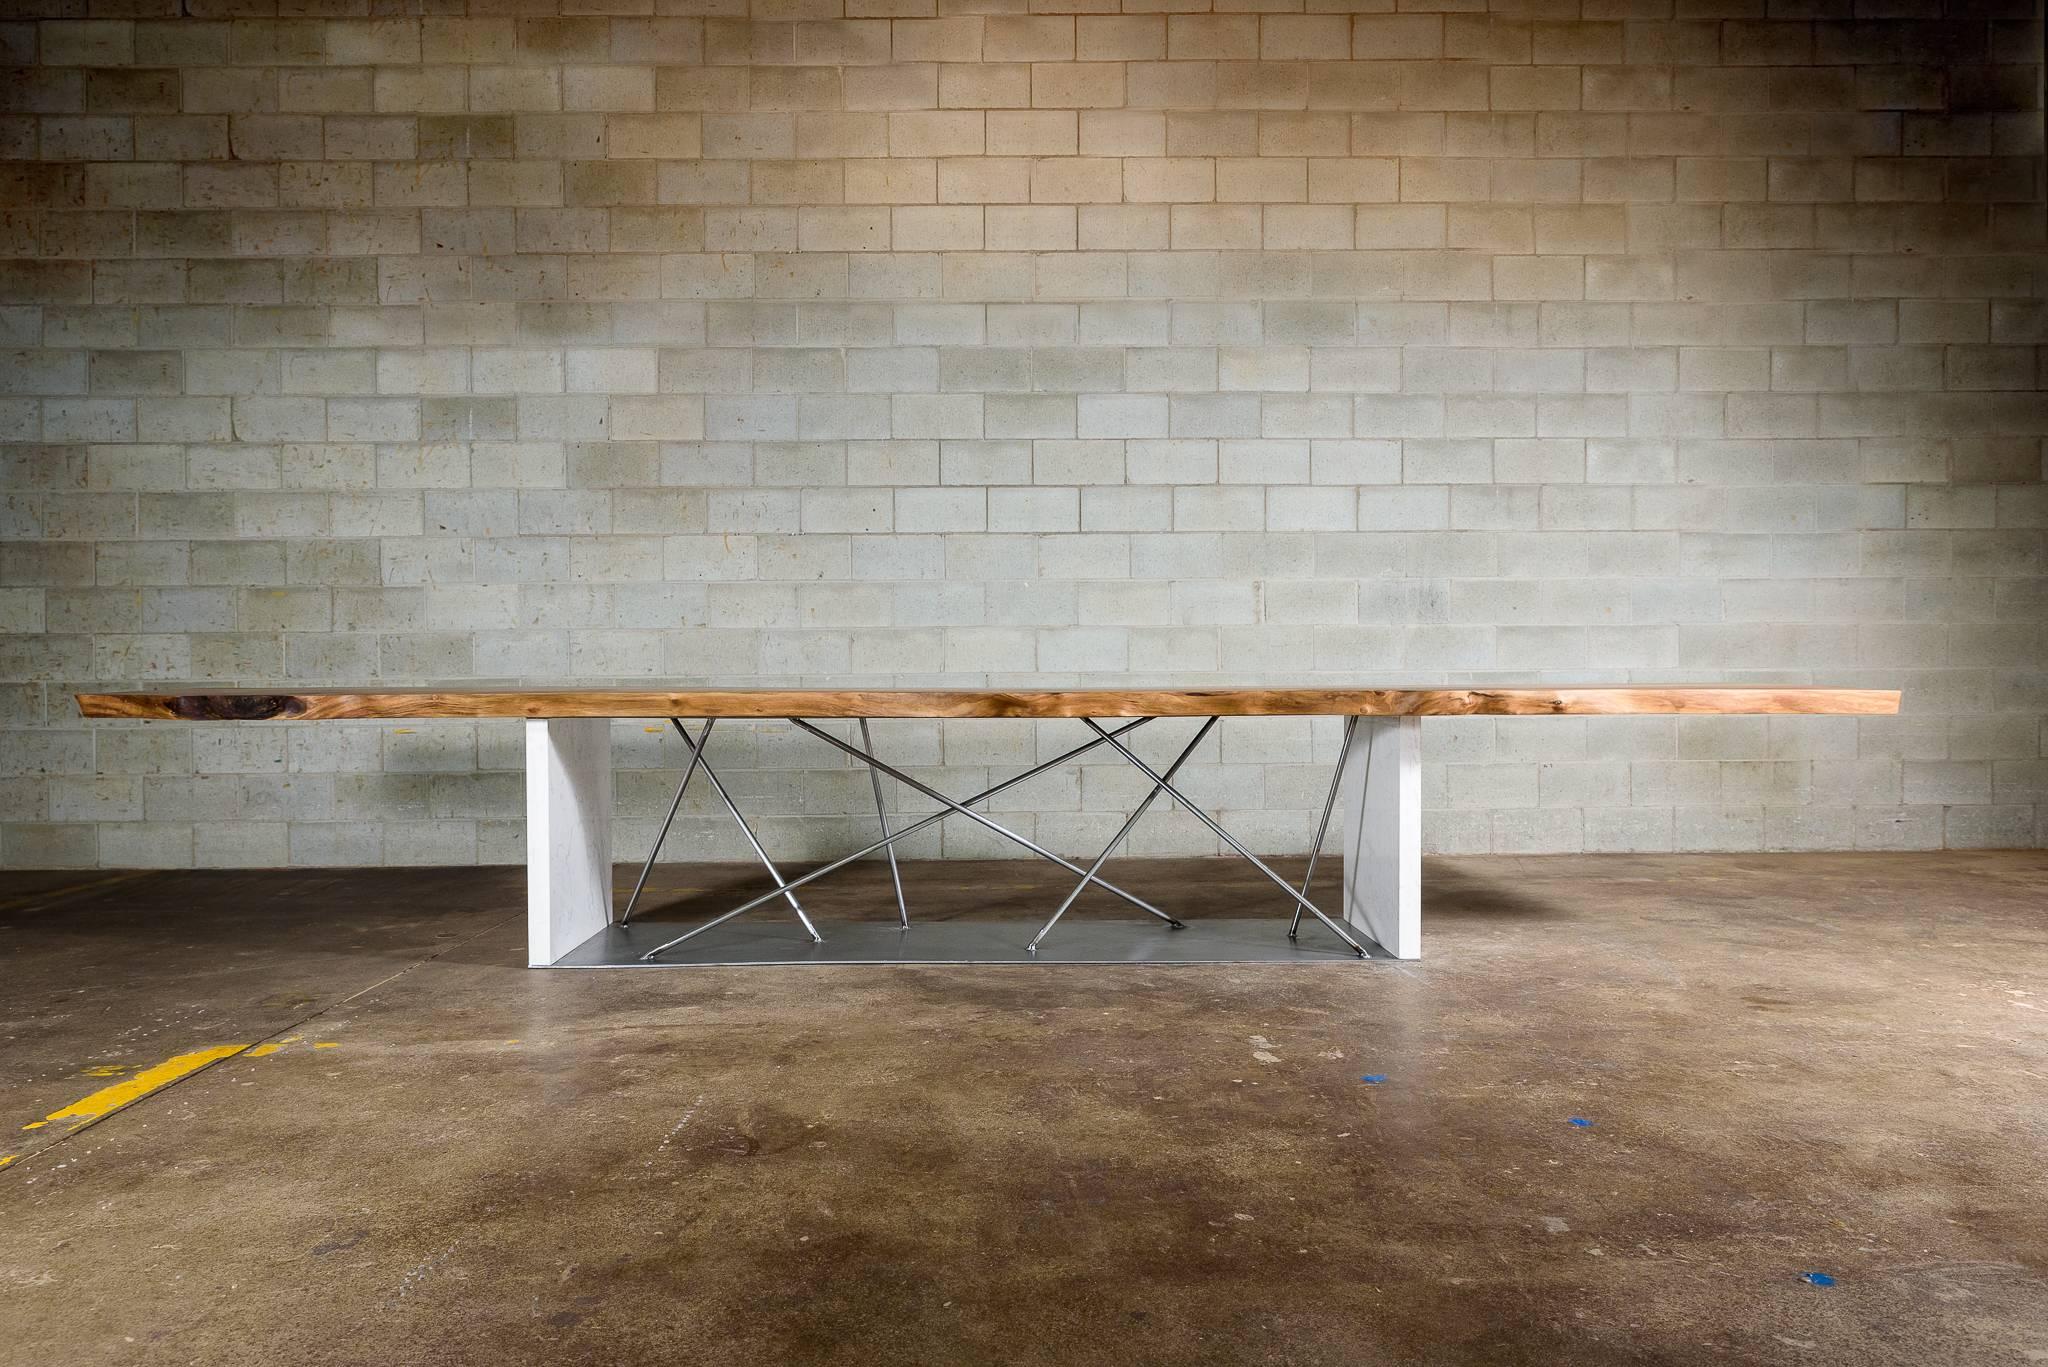 16FT conference table in a single black walnut slab is a must in any conference room. The mariage between black walnut and cambria quartz torquay brings warmth to the room. Our motto, Enhancing wood’s natural beauty has been achieved with this